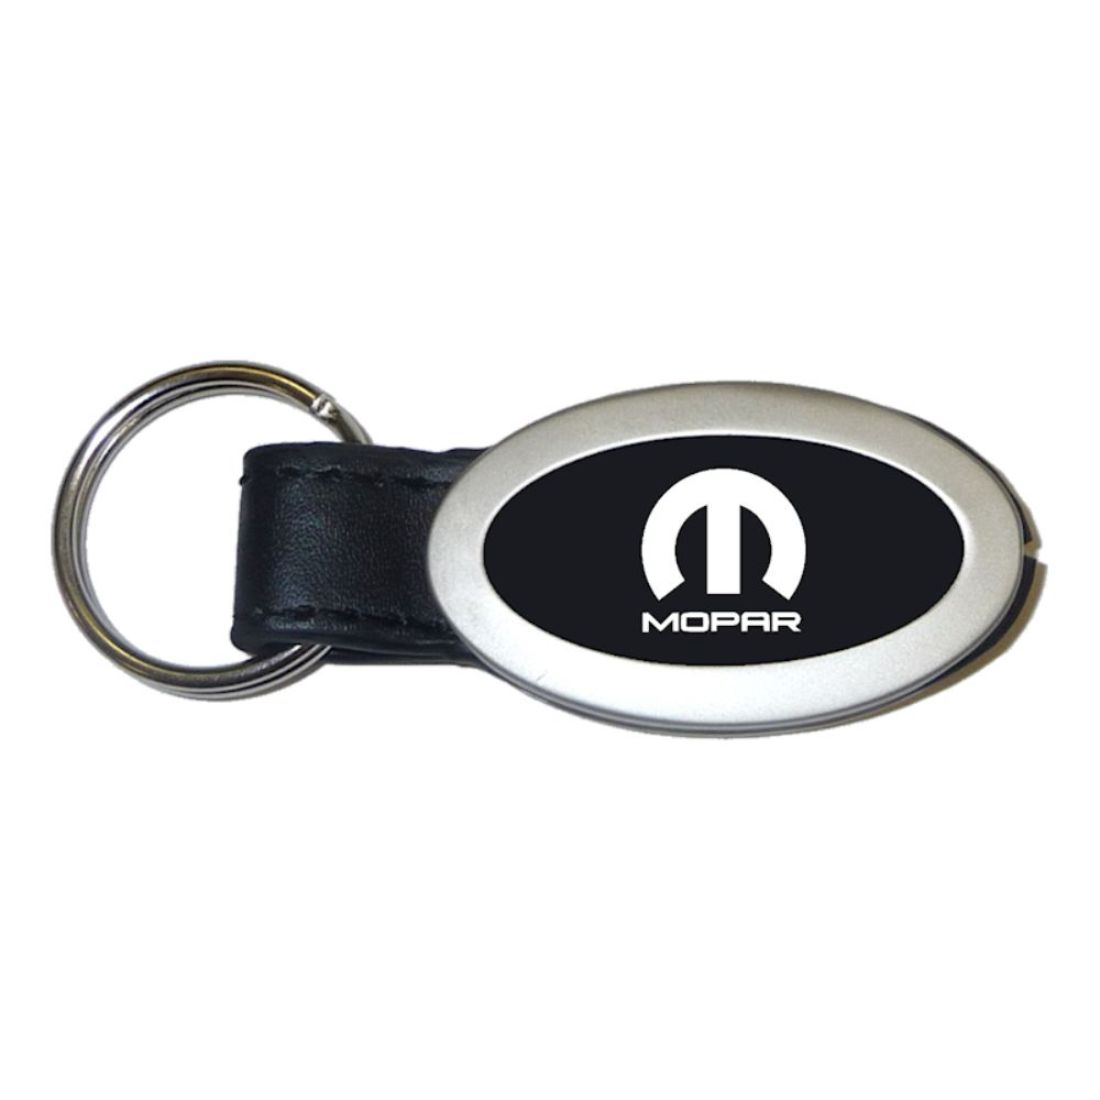 MOPAR Key Ring Black and Chrome Leather Oval Keychain